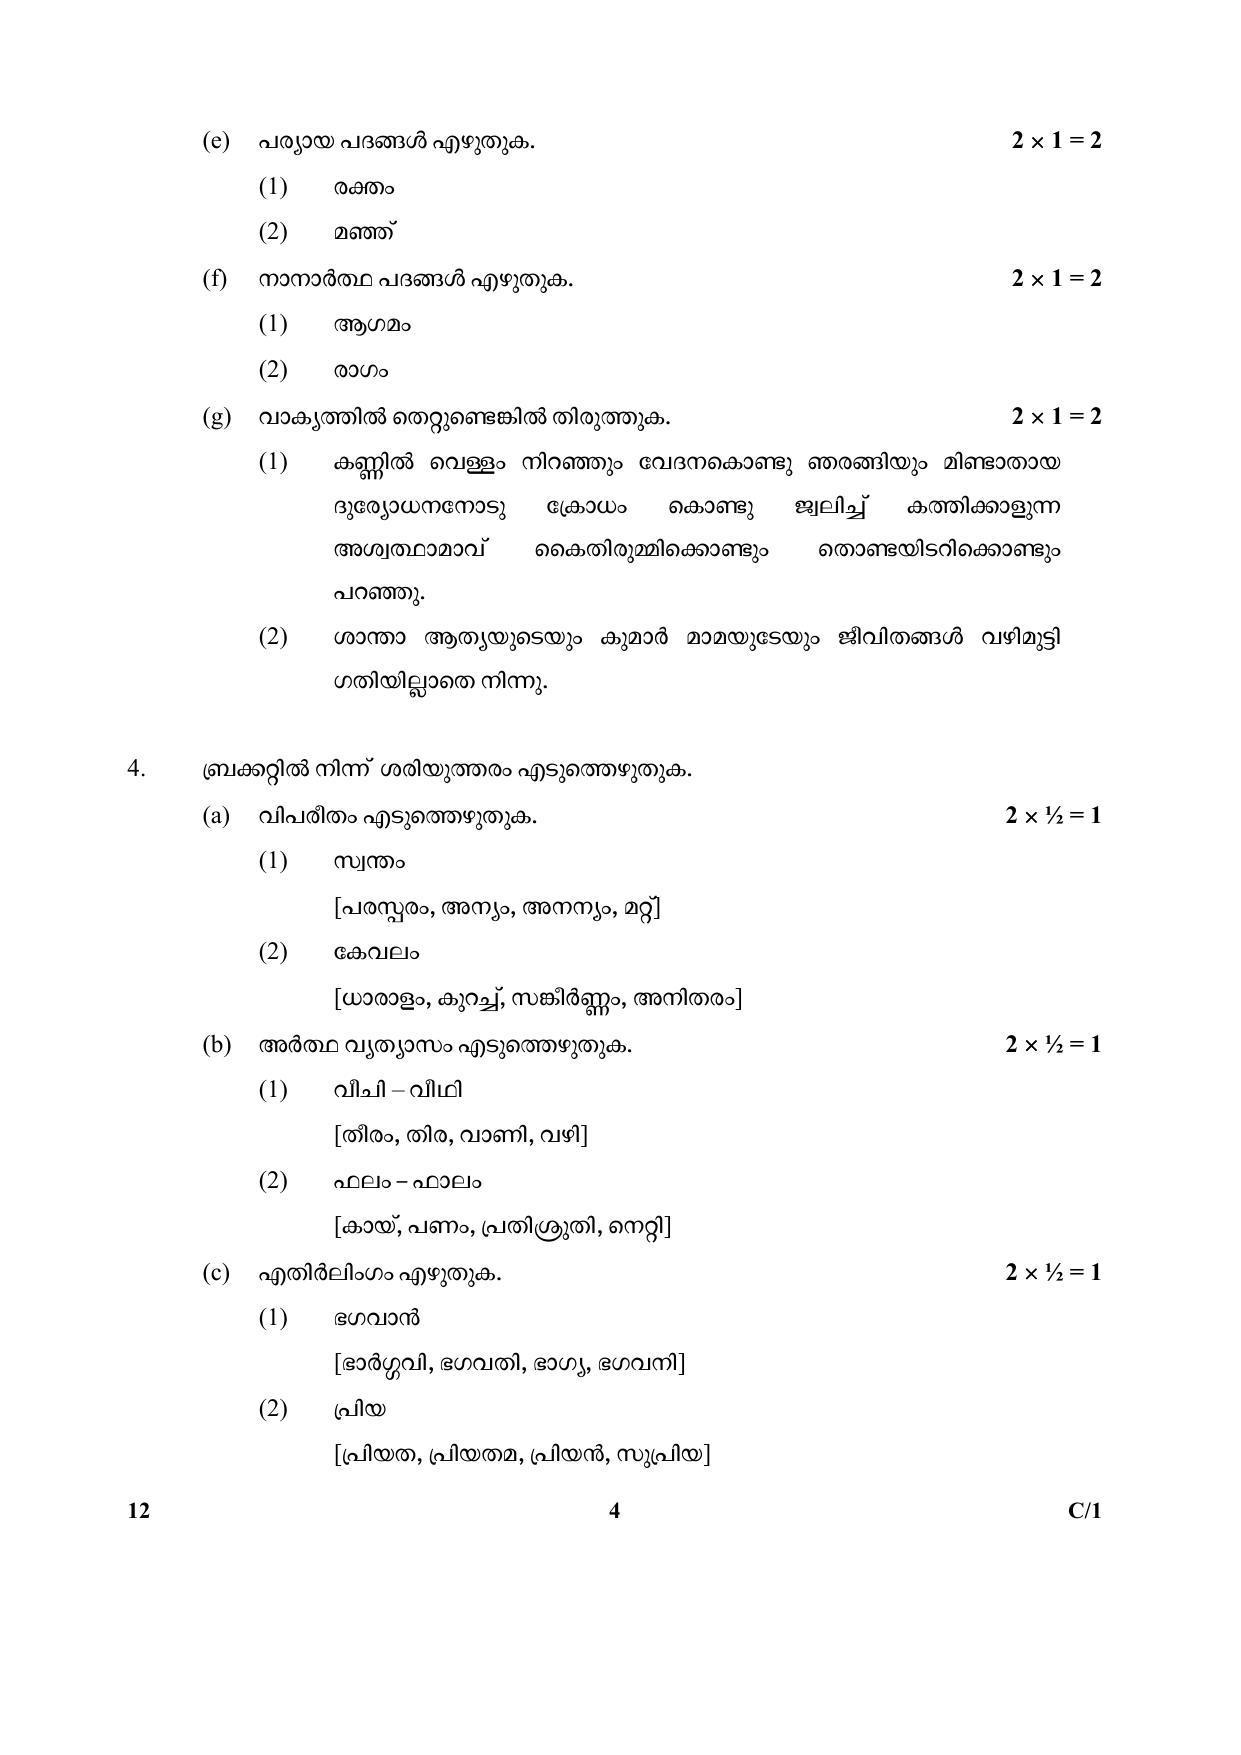 CBSE Class 10 12 (Malayalam) 2018 Compartment Question Paper - Page 4